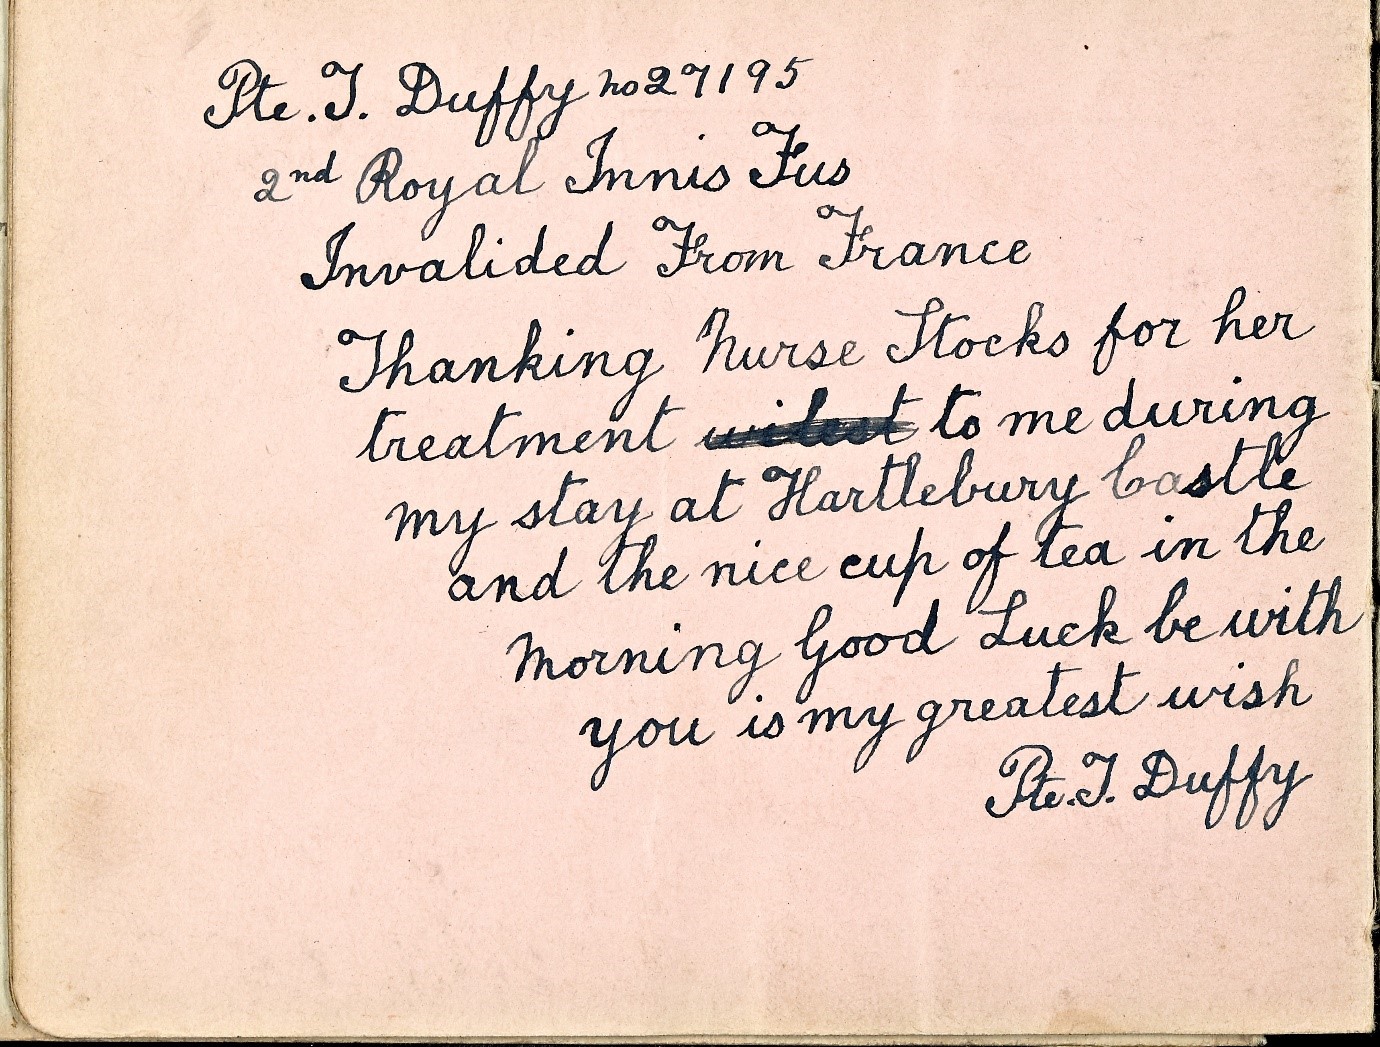 One of the many notes of appreciation to Nurse Stocks from patients